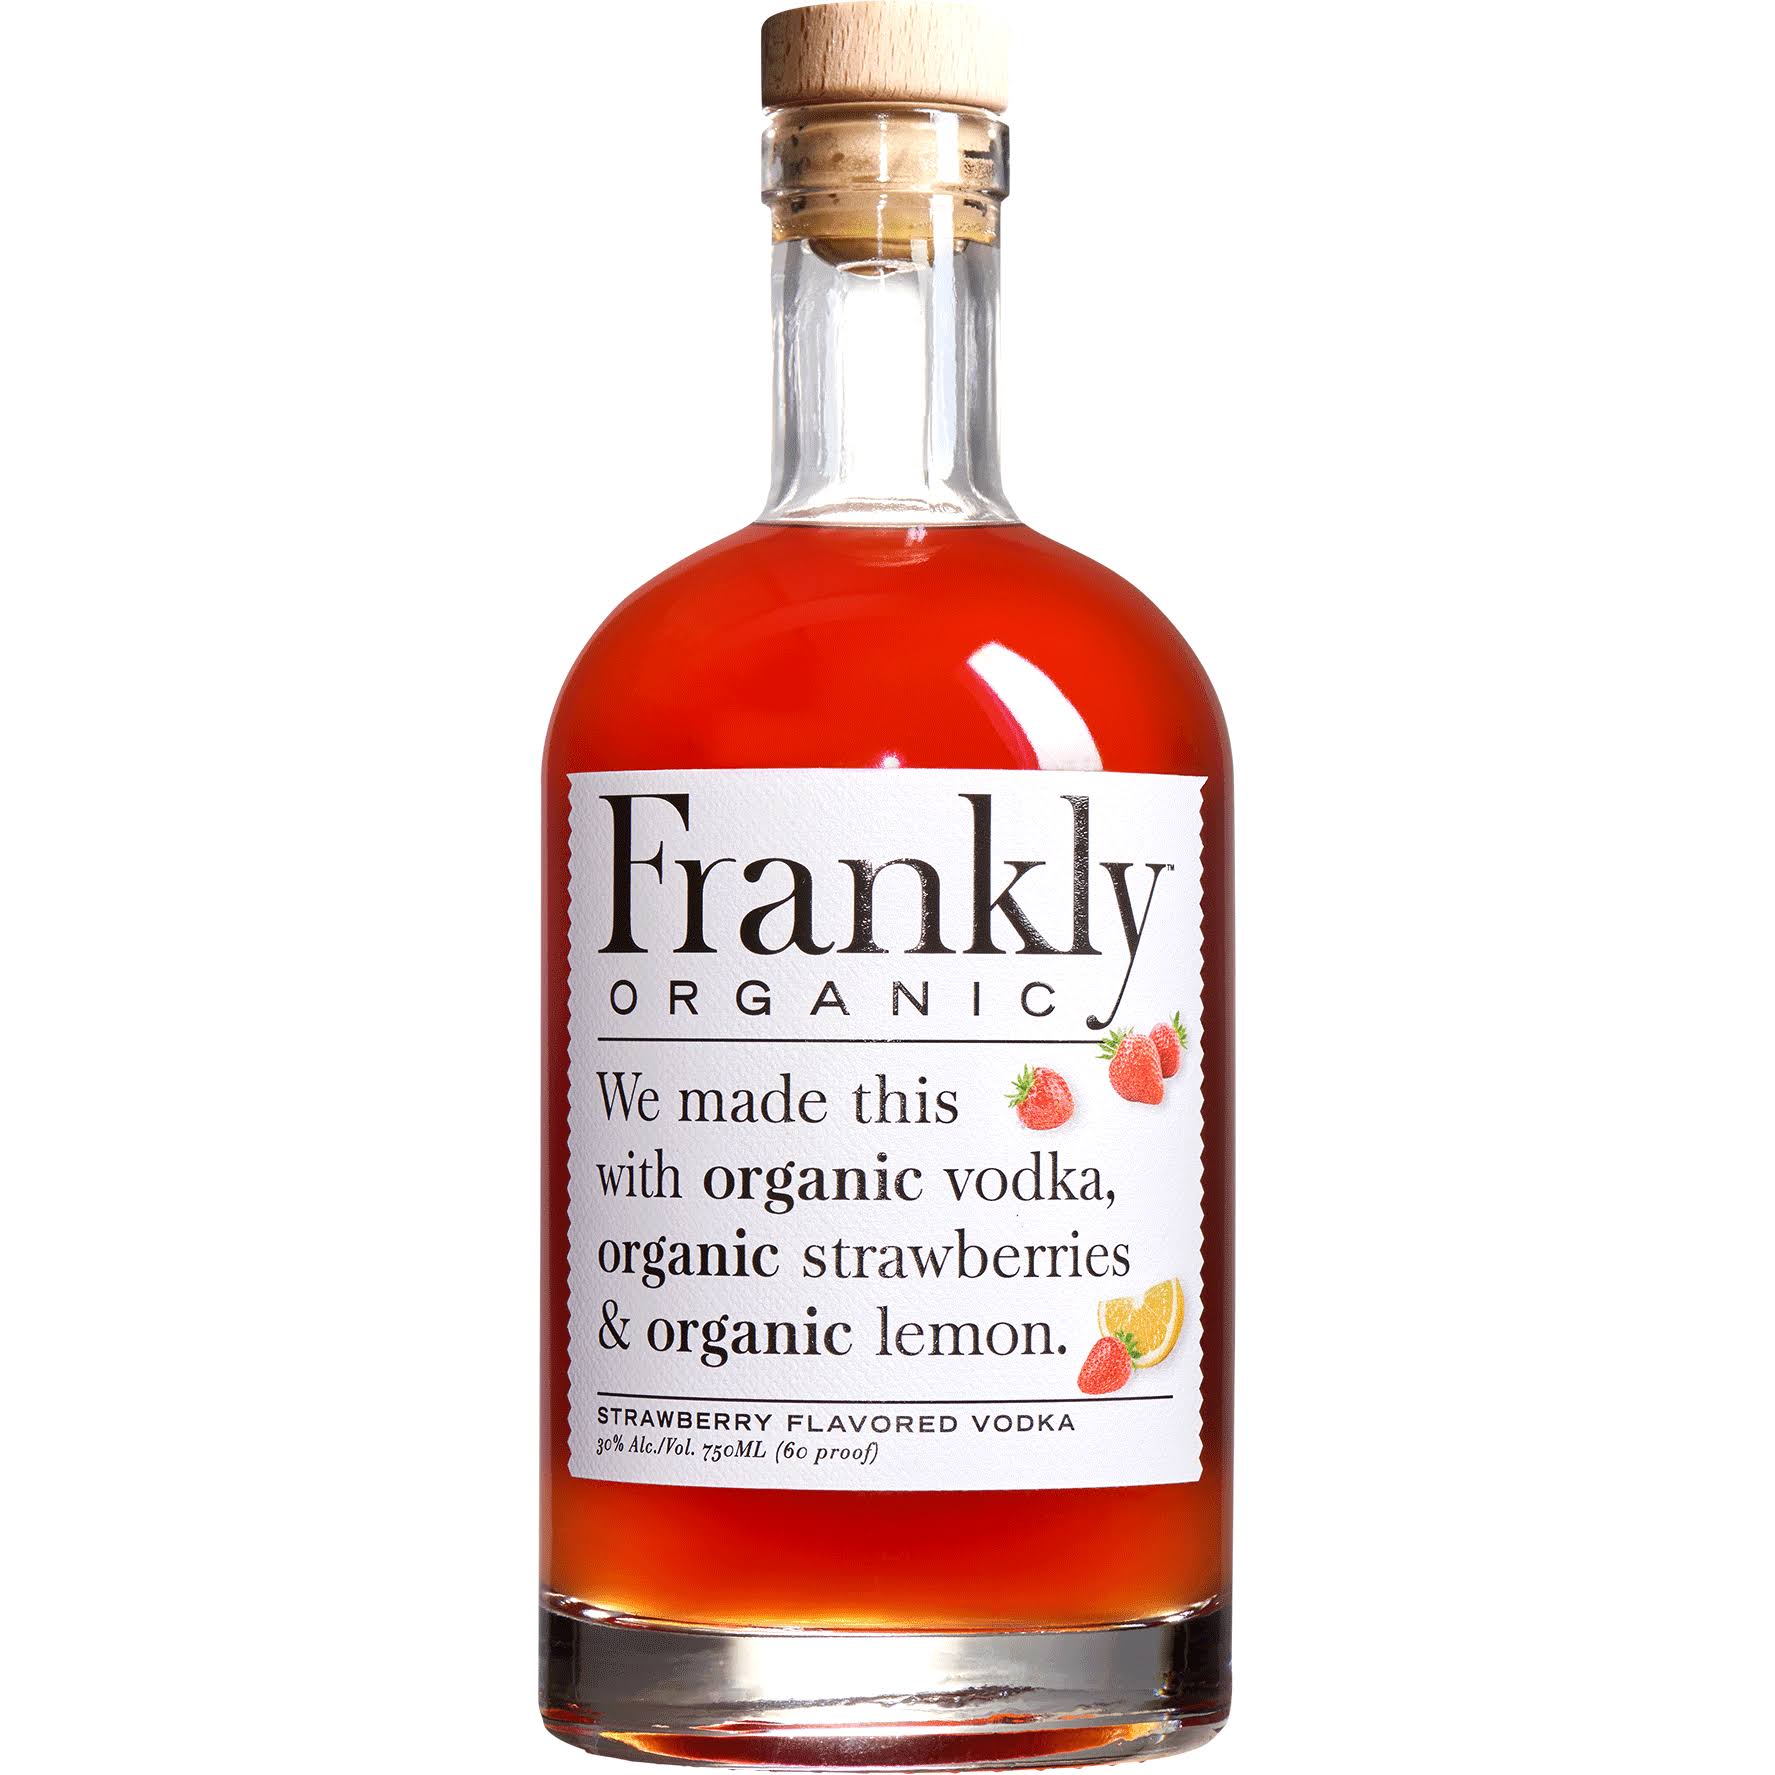 Frankly Vodka, Organic, Strawberry Flavored - 750 ml